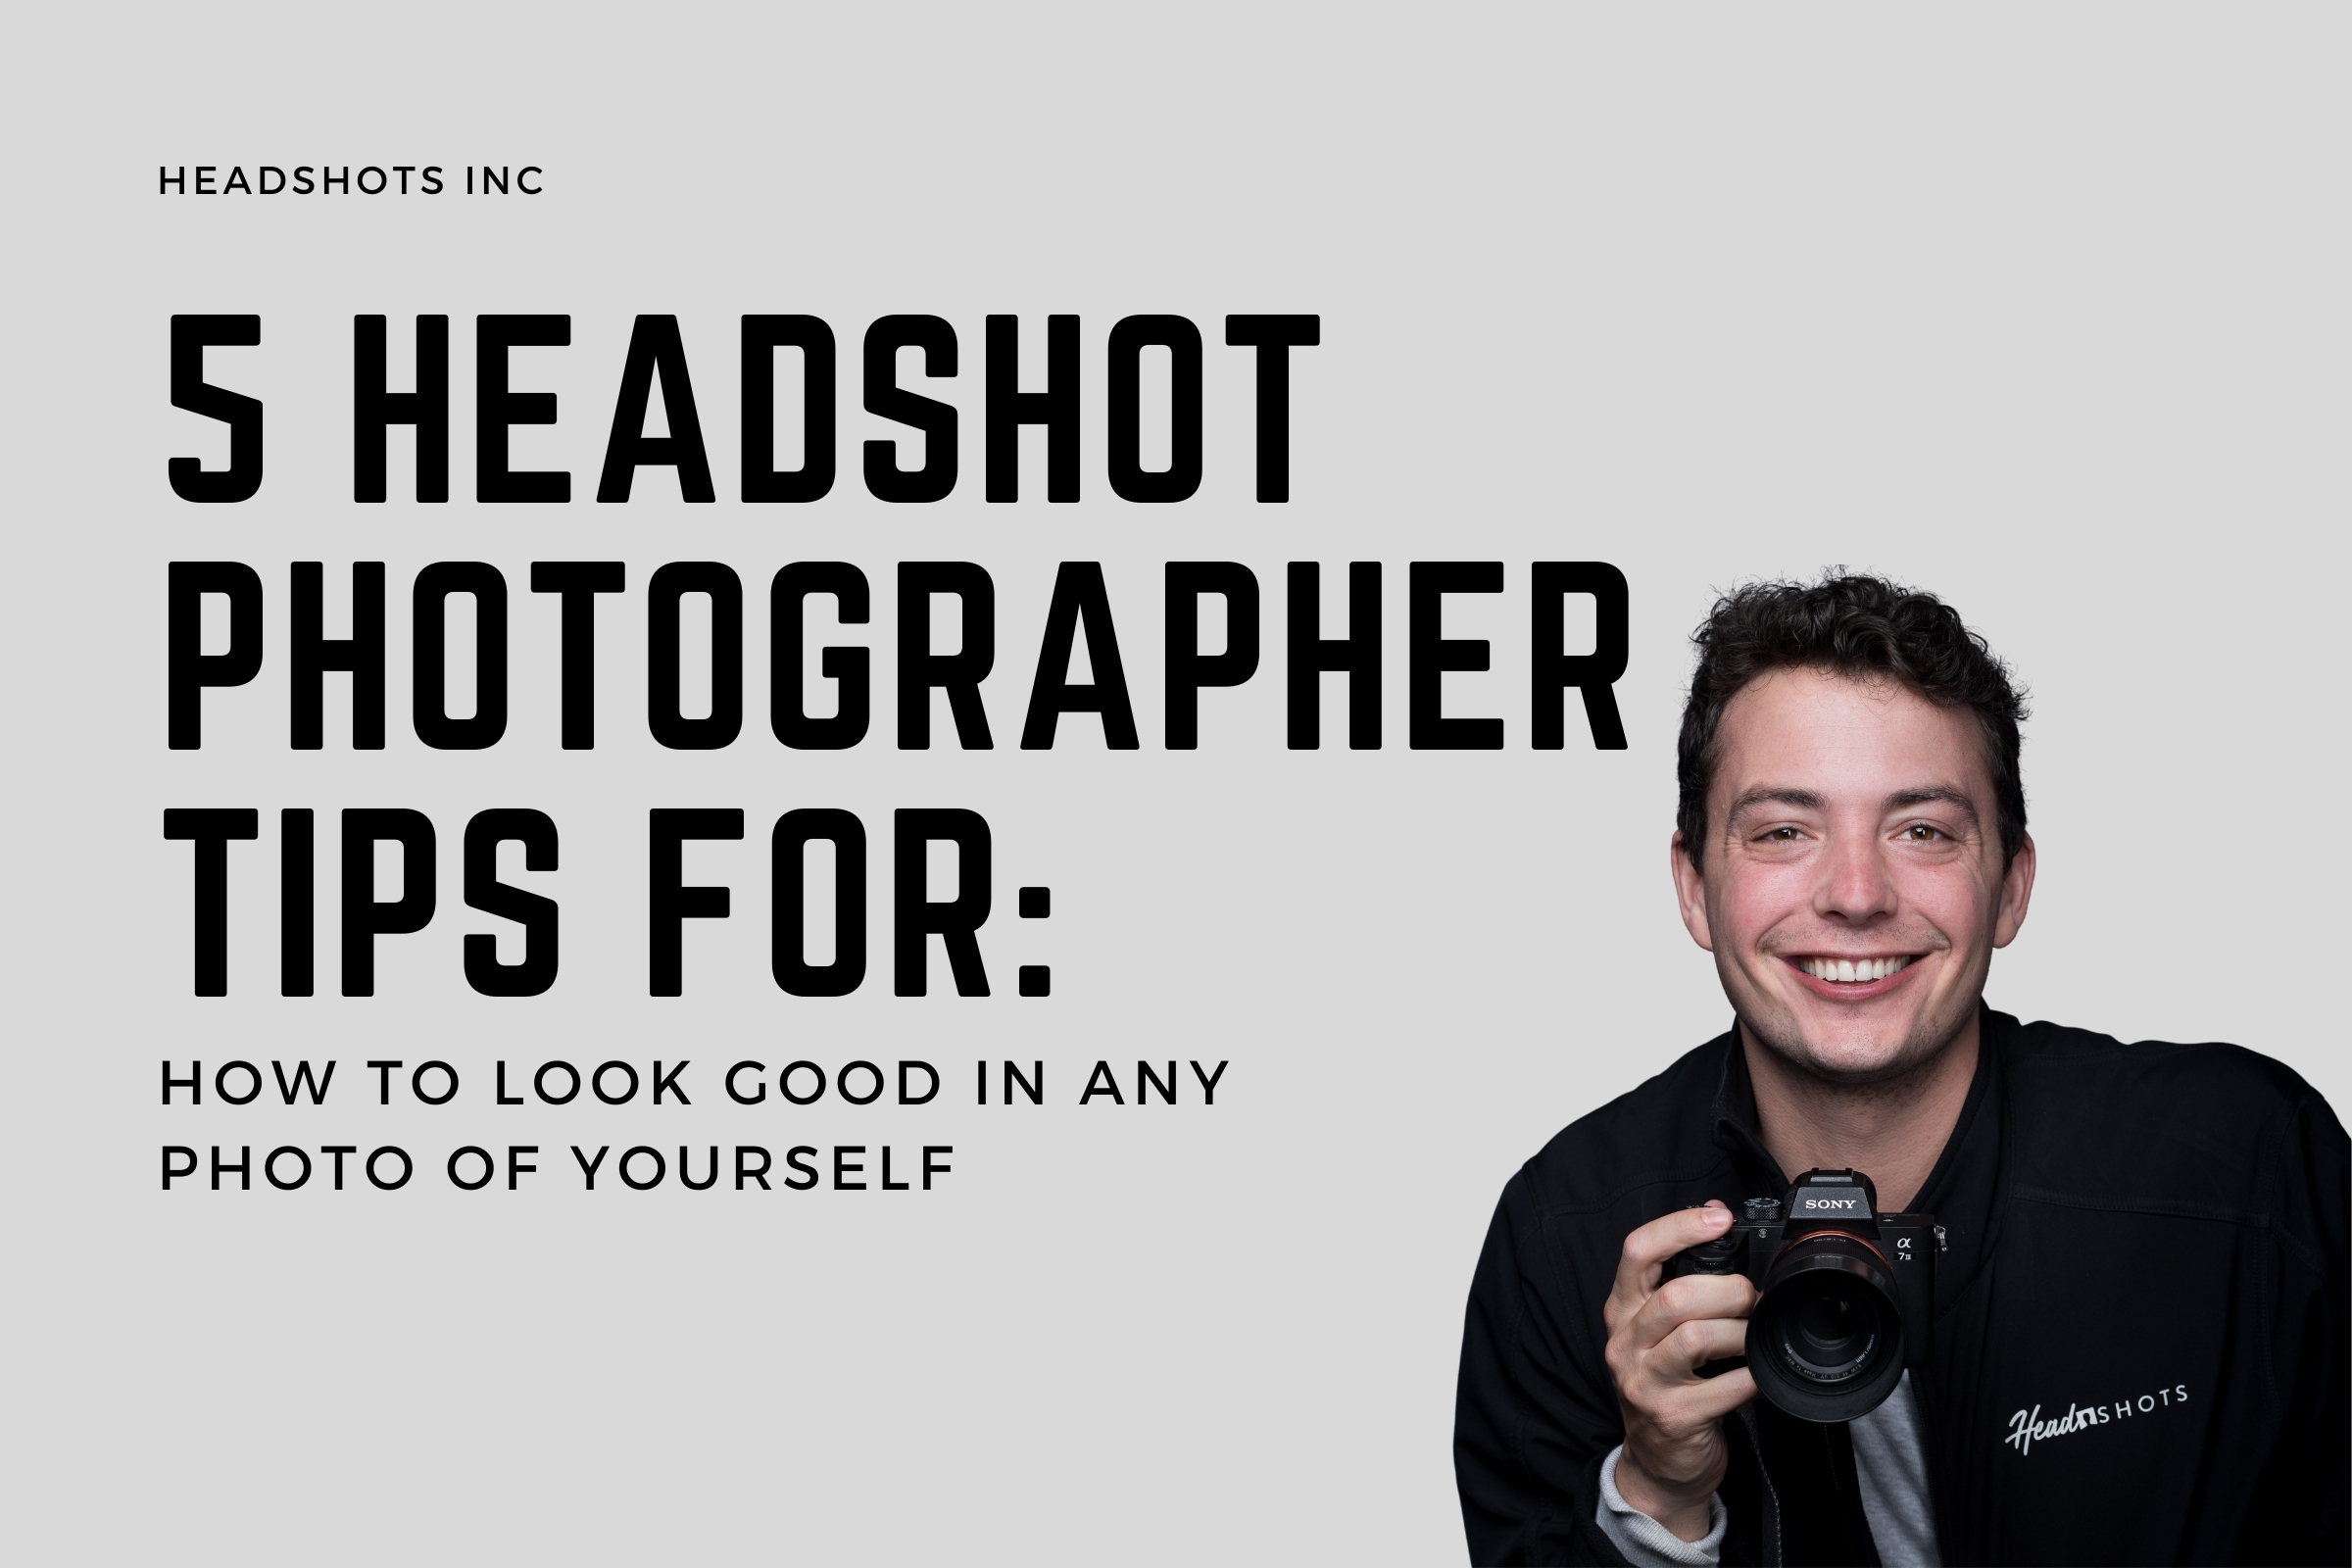 Headshot photographer tips on how to look great